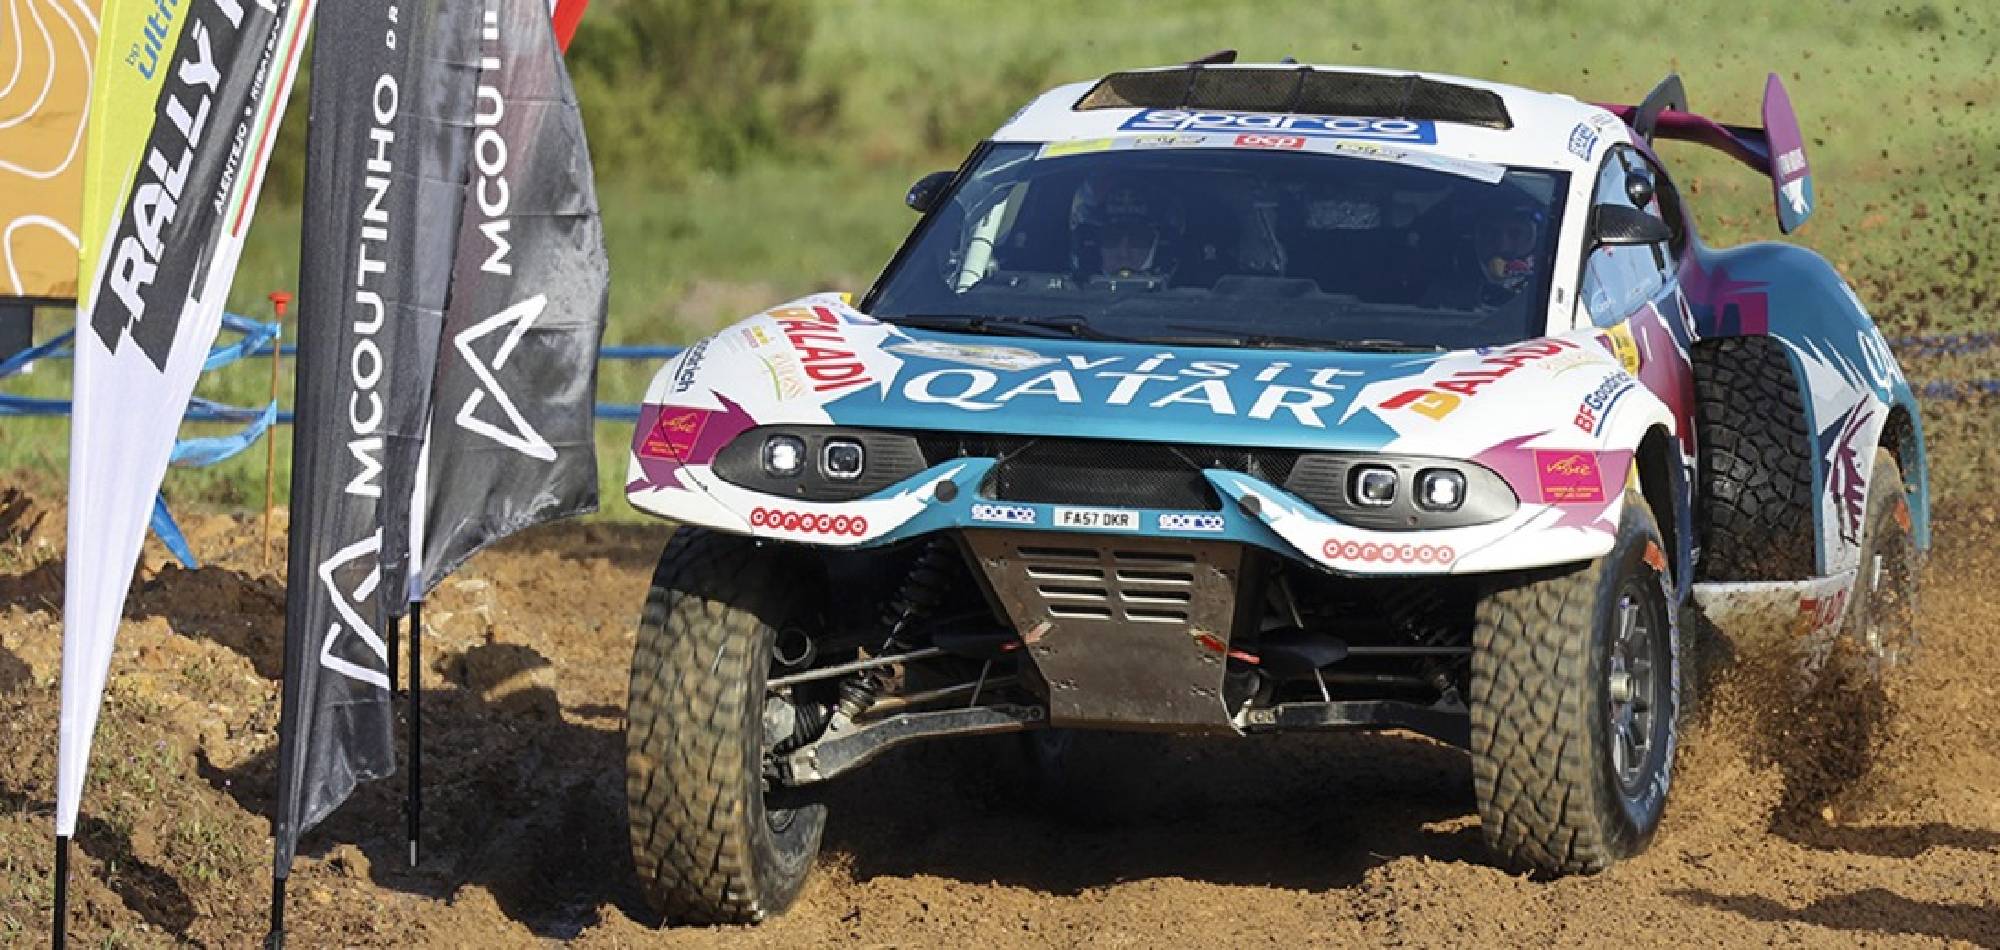 Rally Raid Portugal: Chicherit leads after first stage as Al Attiyah slips to sixth